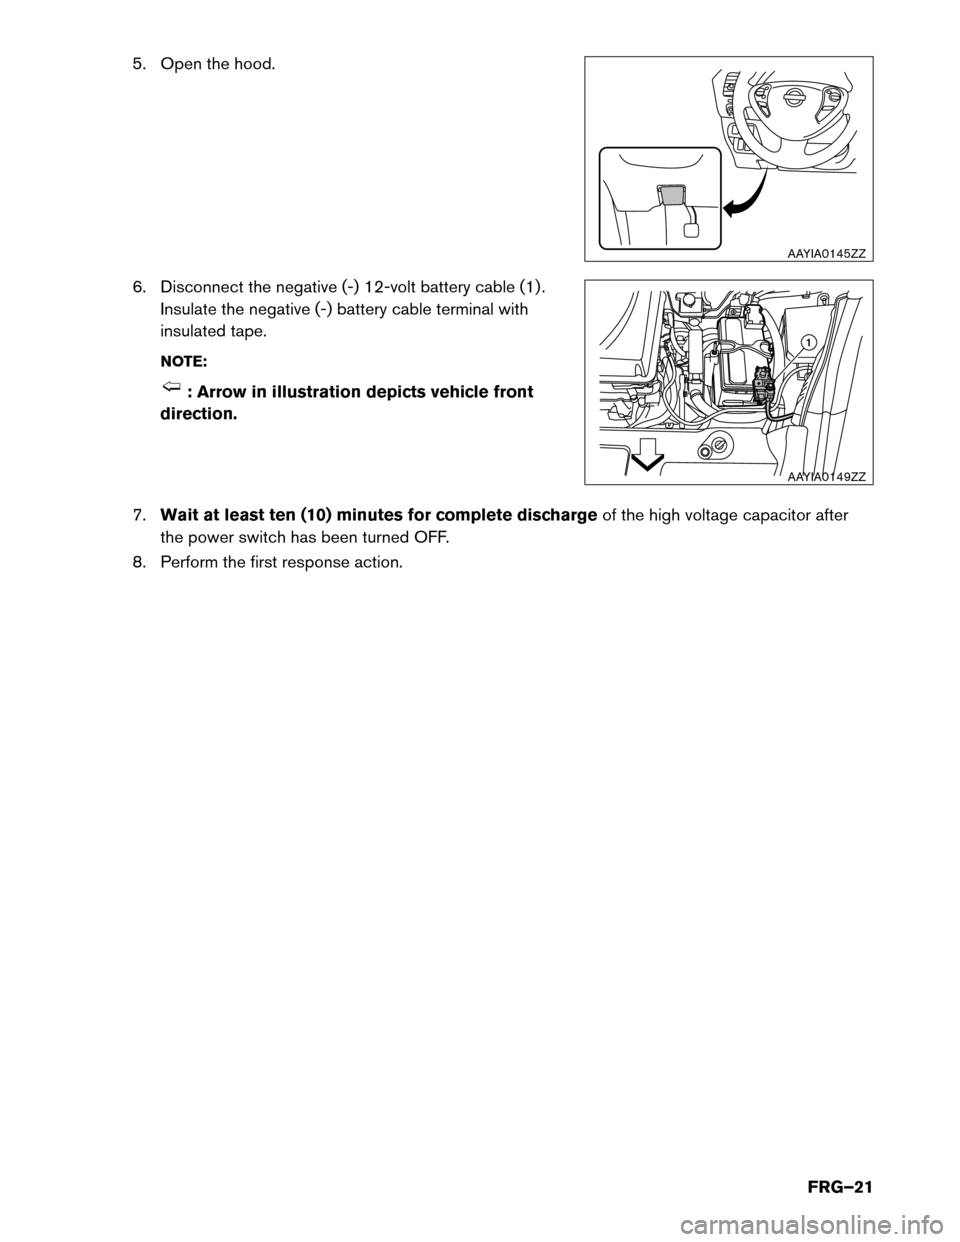 NISSAN LEAF 2016 1.G First Responders Guide 5. Open the hood.
6.
Disconnect the negative (-) 12-volt battery cable (1) .
Insulate the negative (-) battery cable terminal with
insulated tape.
NOTE: : Arrow in illustration depicts vehicle front
d